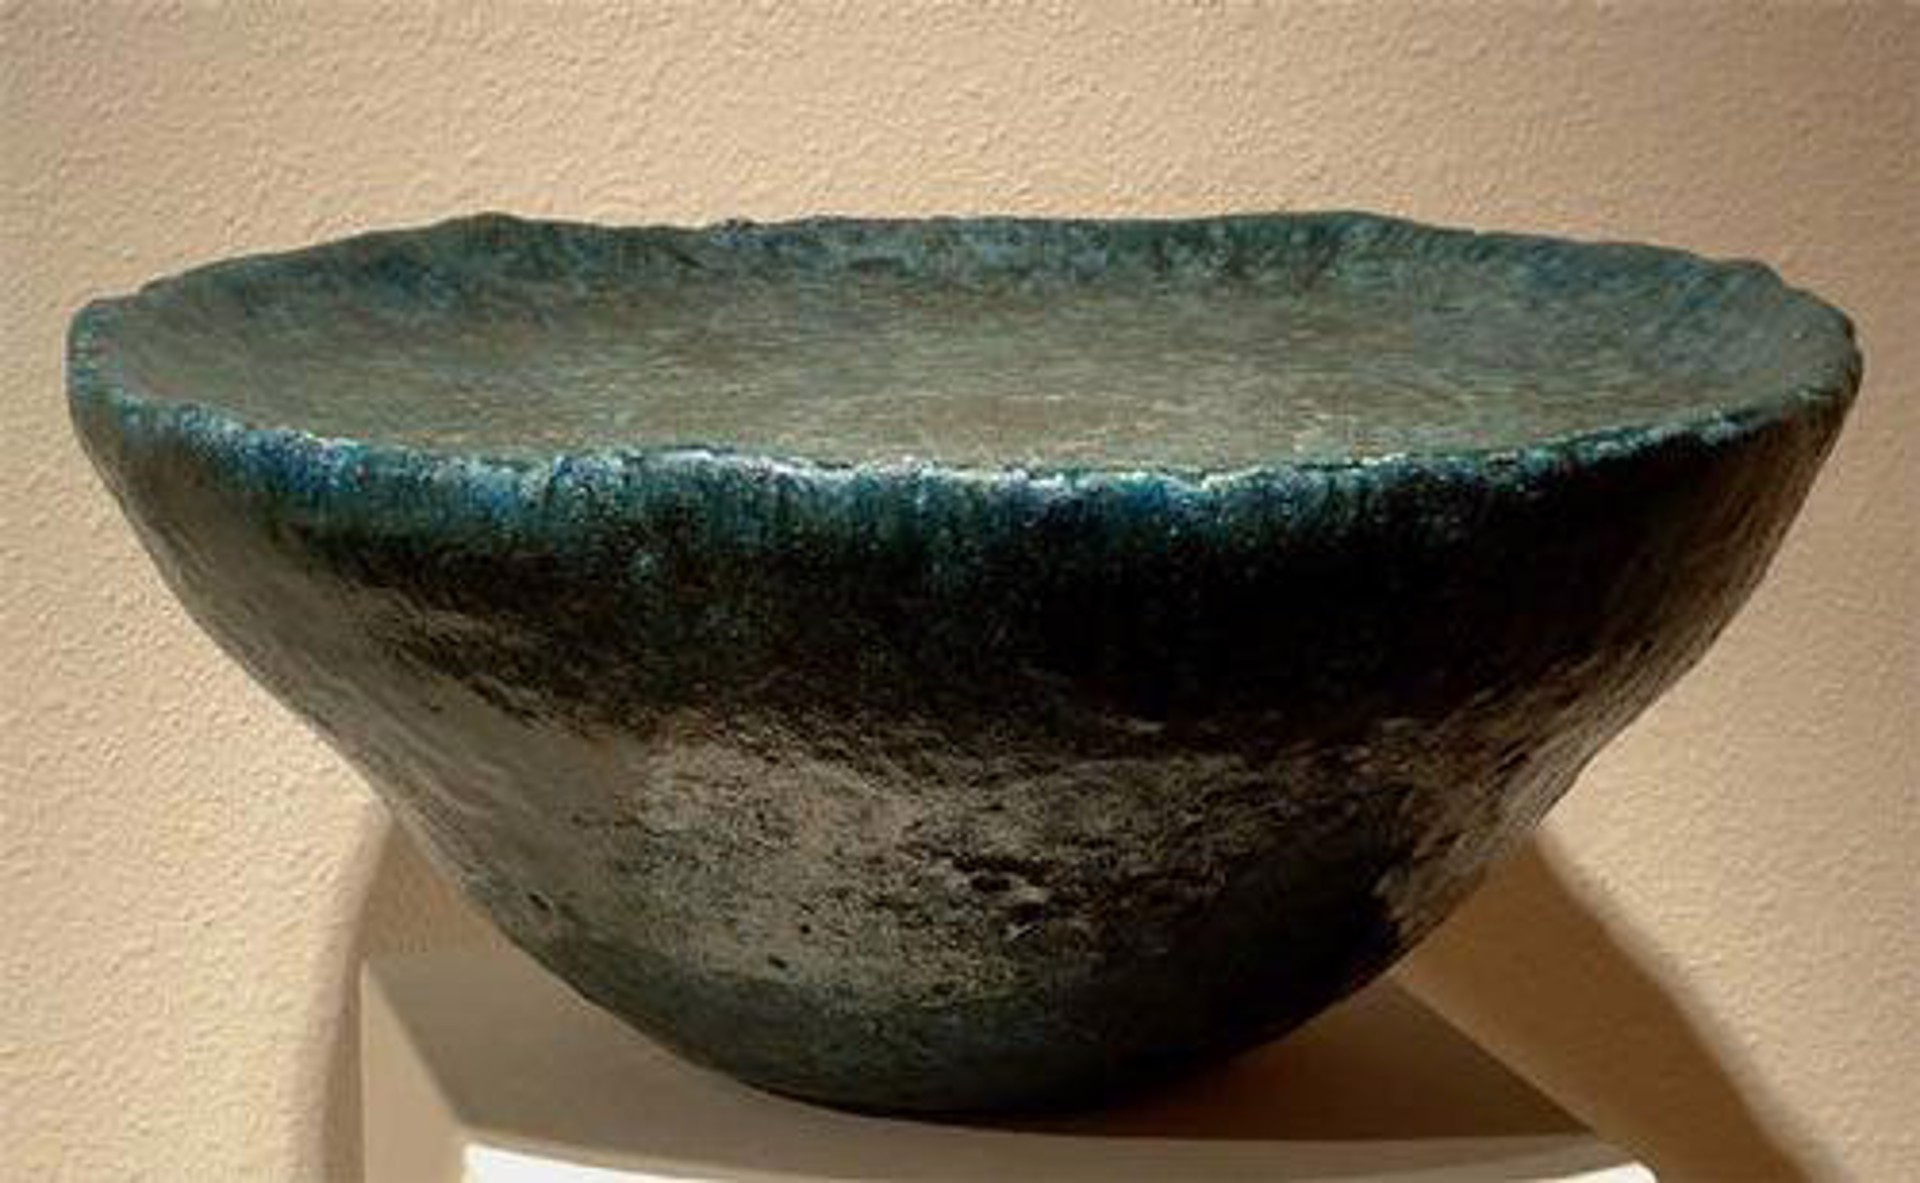 CONTEMPLATION VESSEL #27 by Ann Mallory